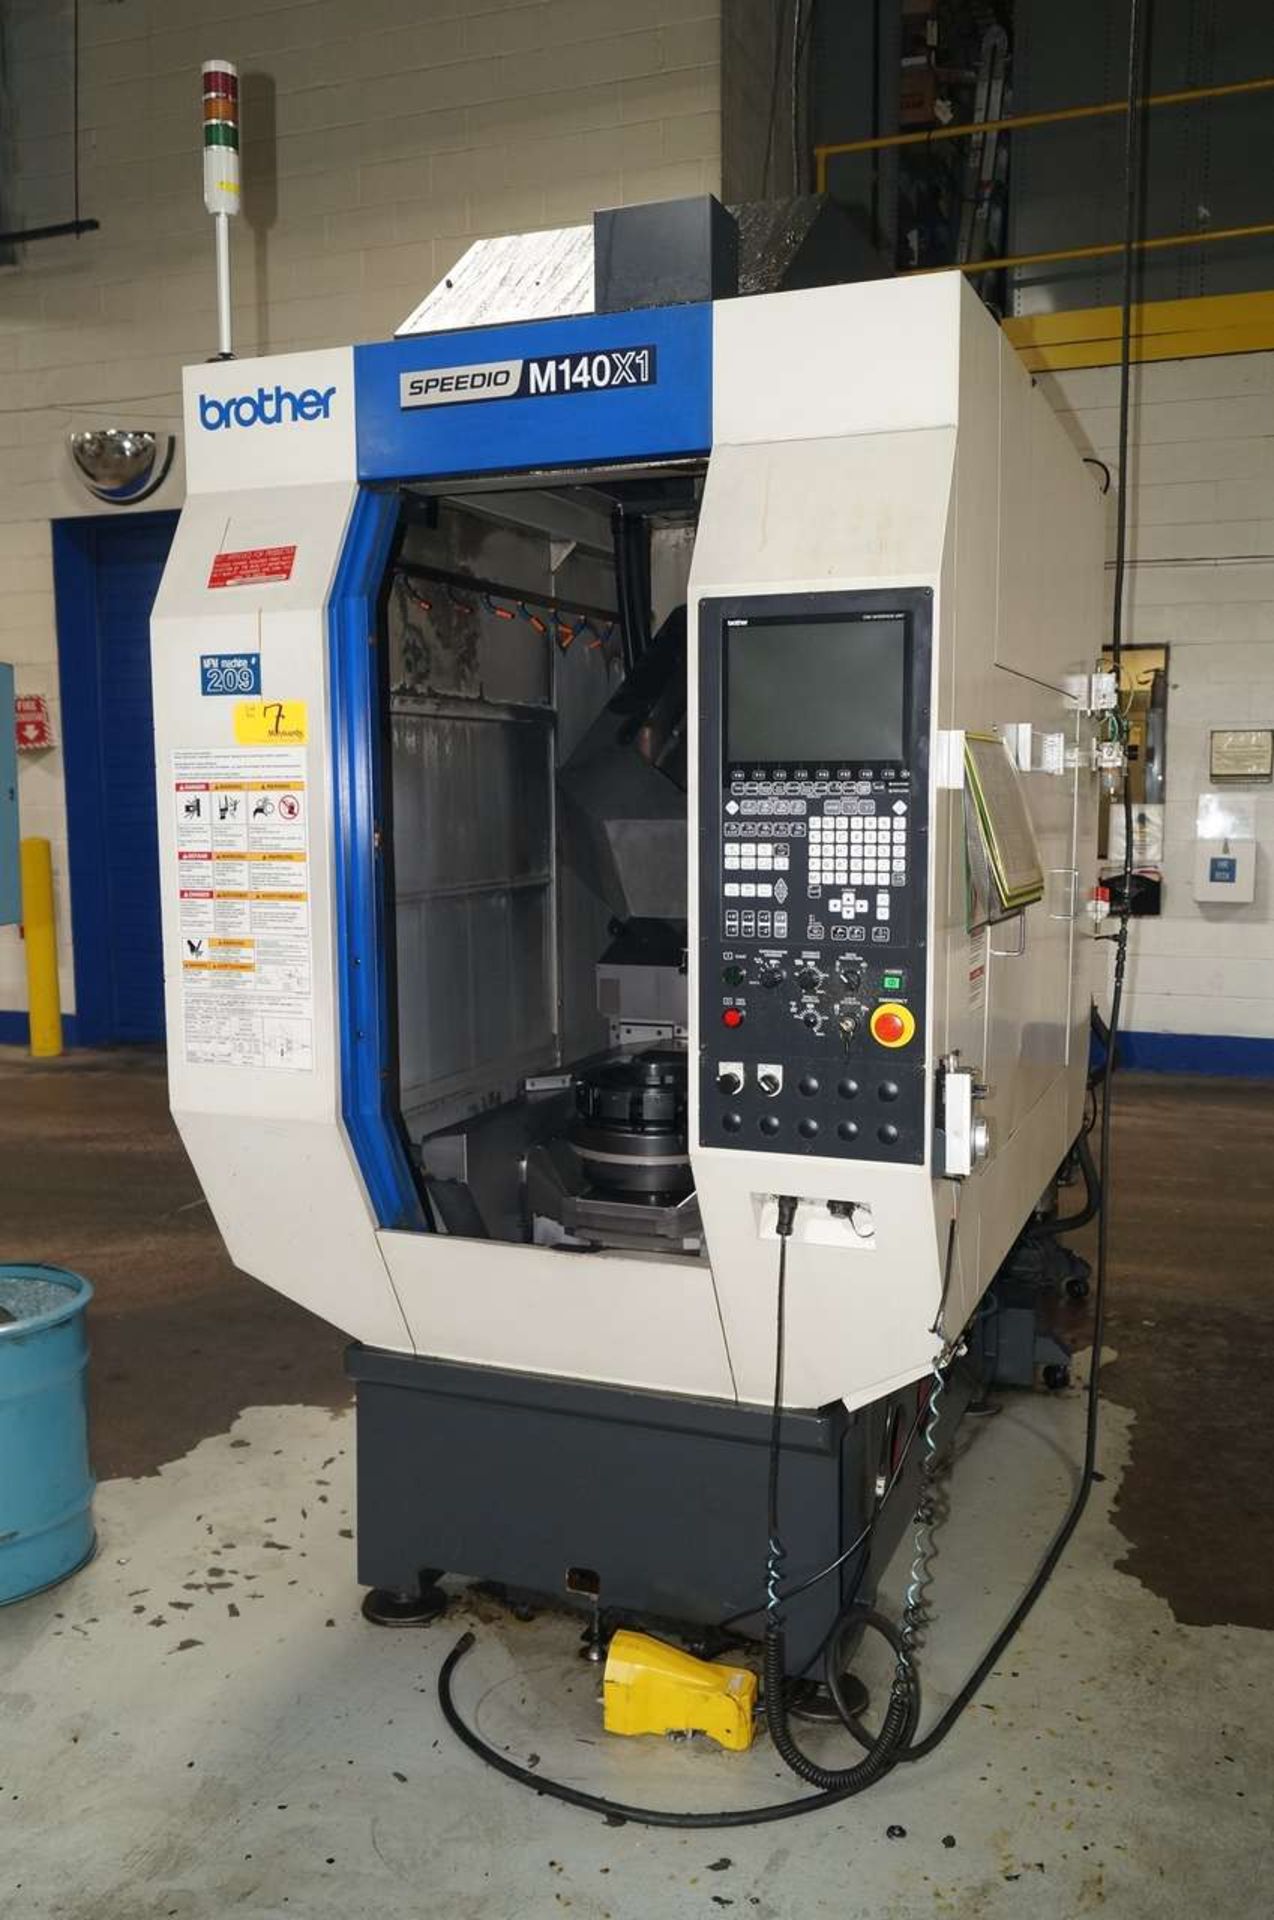 2014 Brother Speedio M140x1 5 - Axis (4 + 1) CNC Compact Vertical Spindle Machining Center - Image 2 of 10